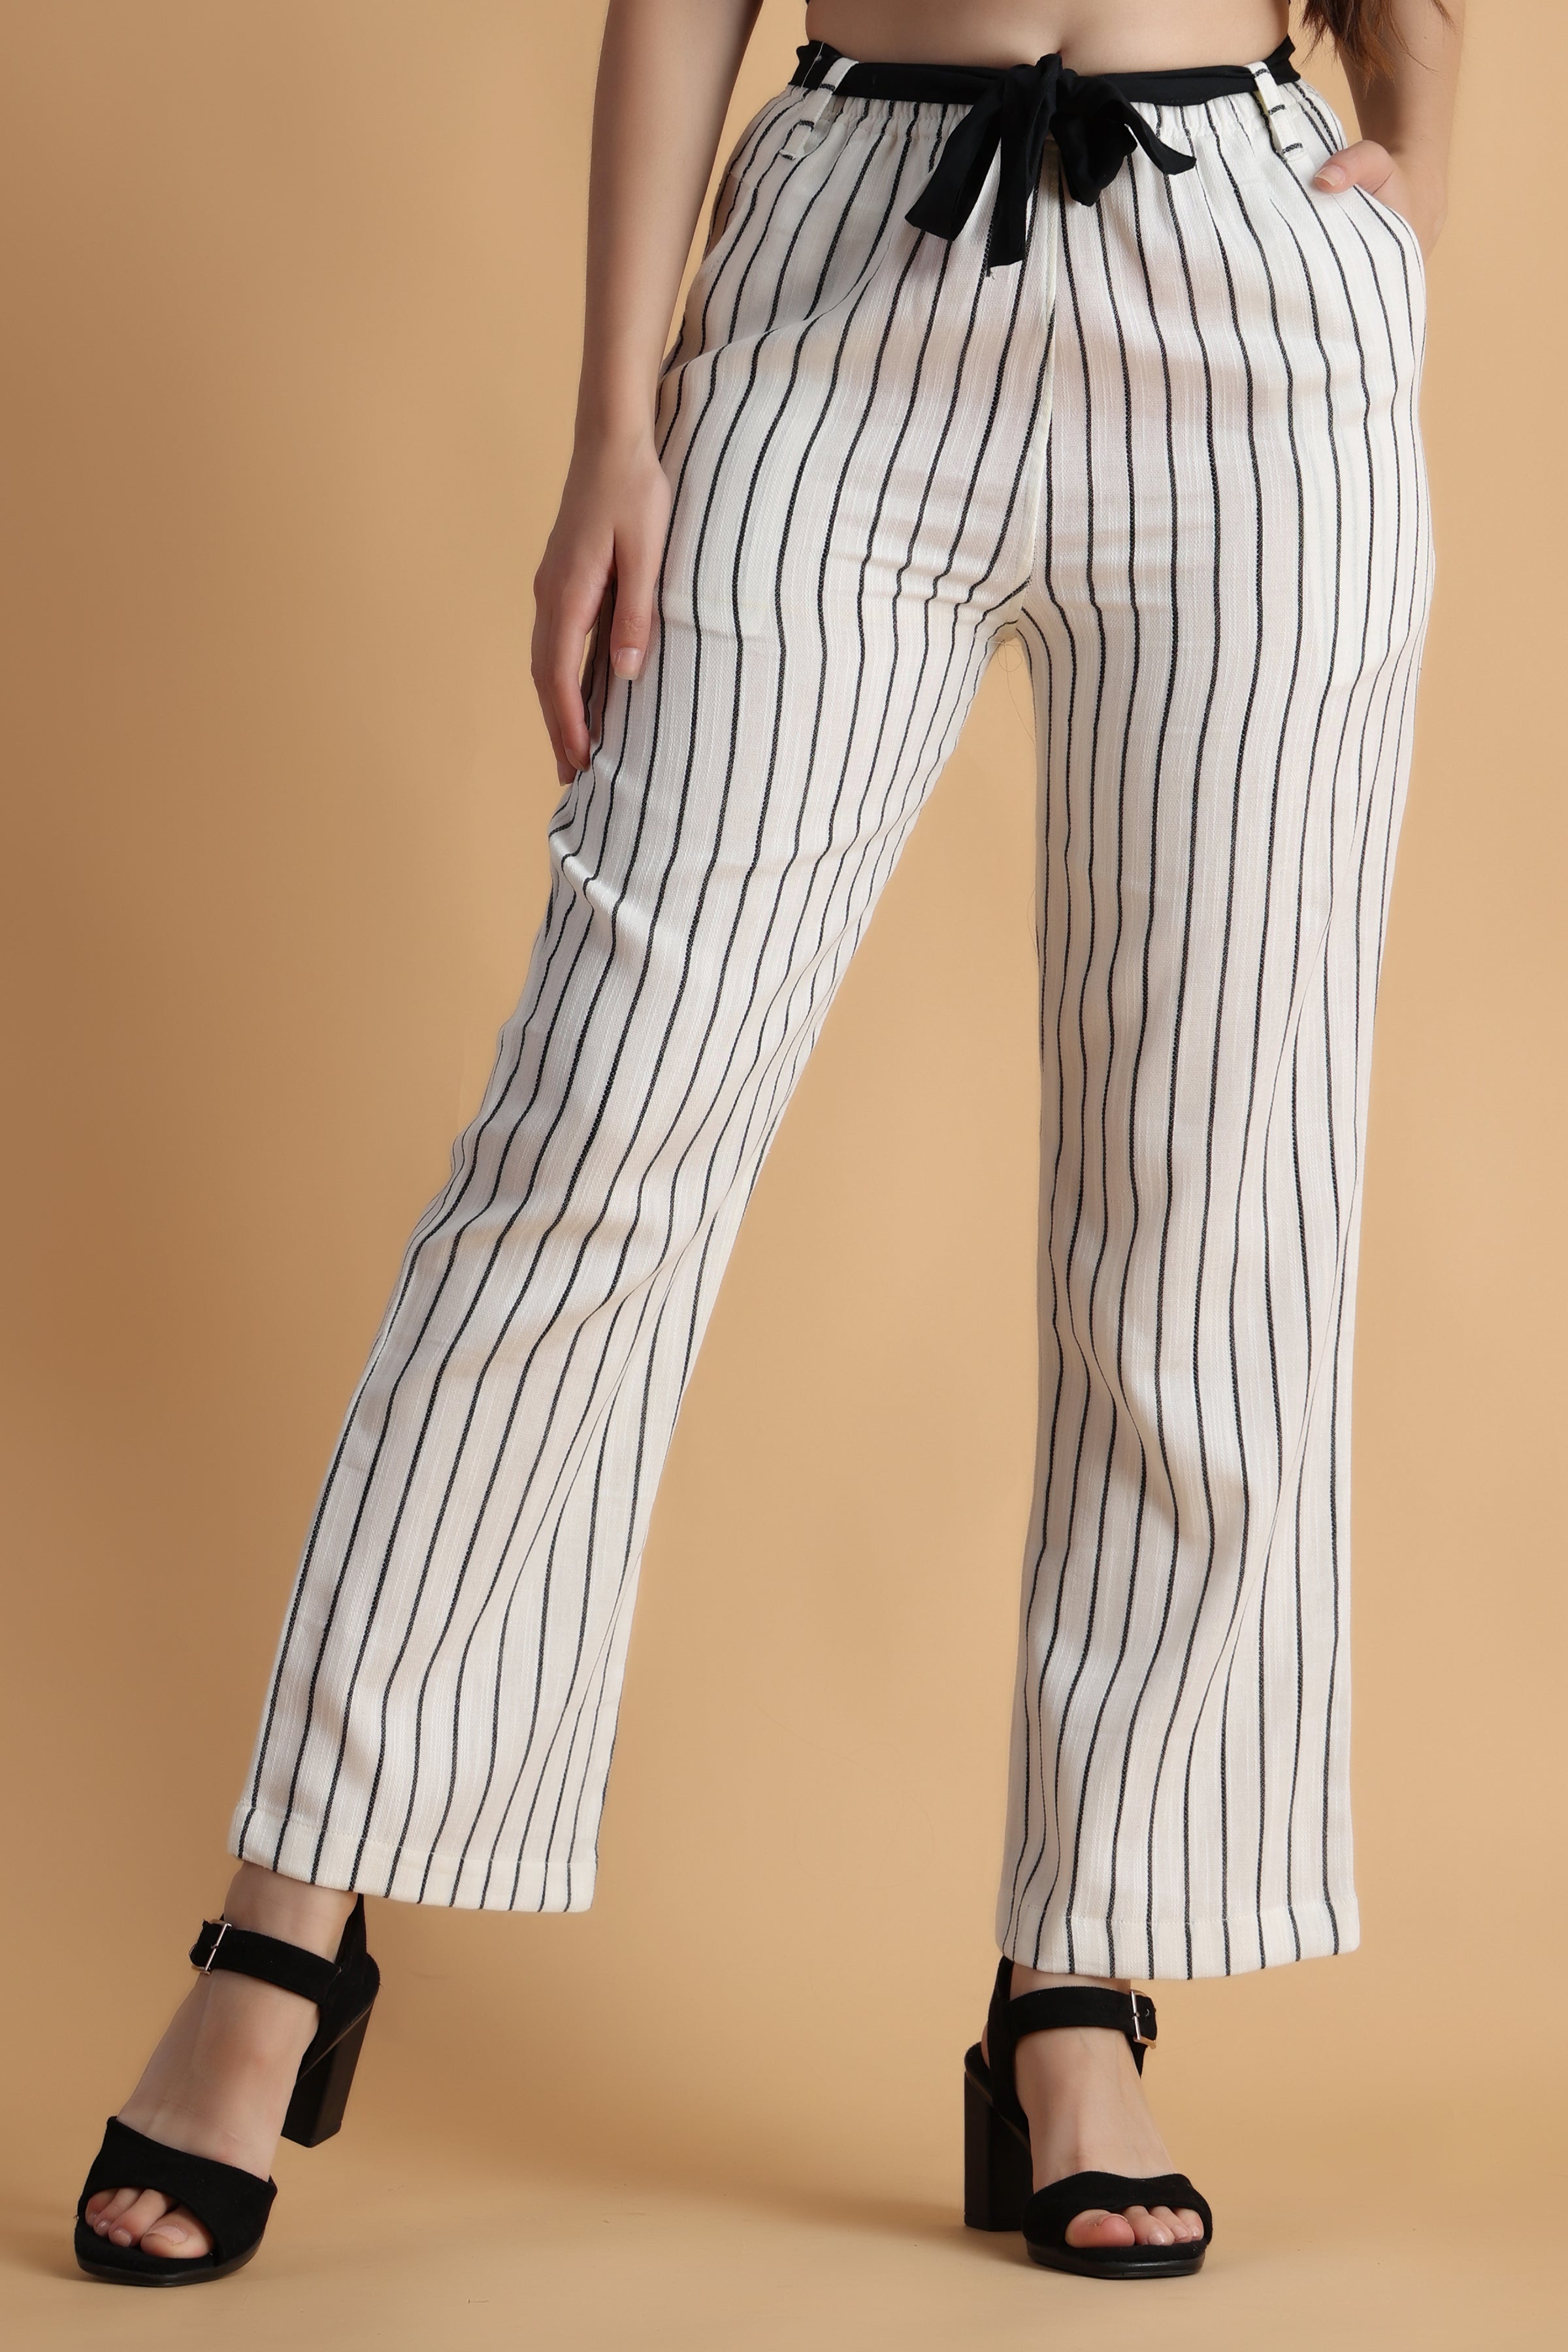 how to style striped palazzo pants and crop top  Fashion Mate  Latest  Fashion Trends in India  Fashion Mate  Latest Fashion Trends in India